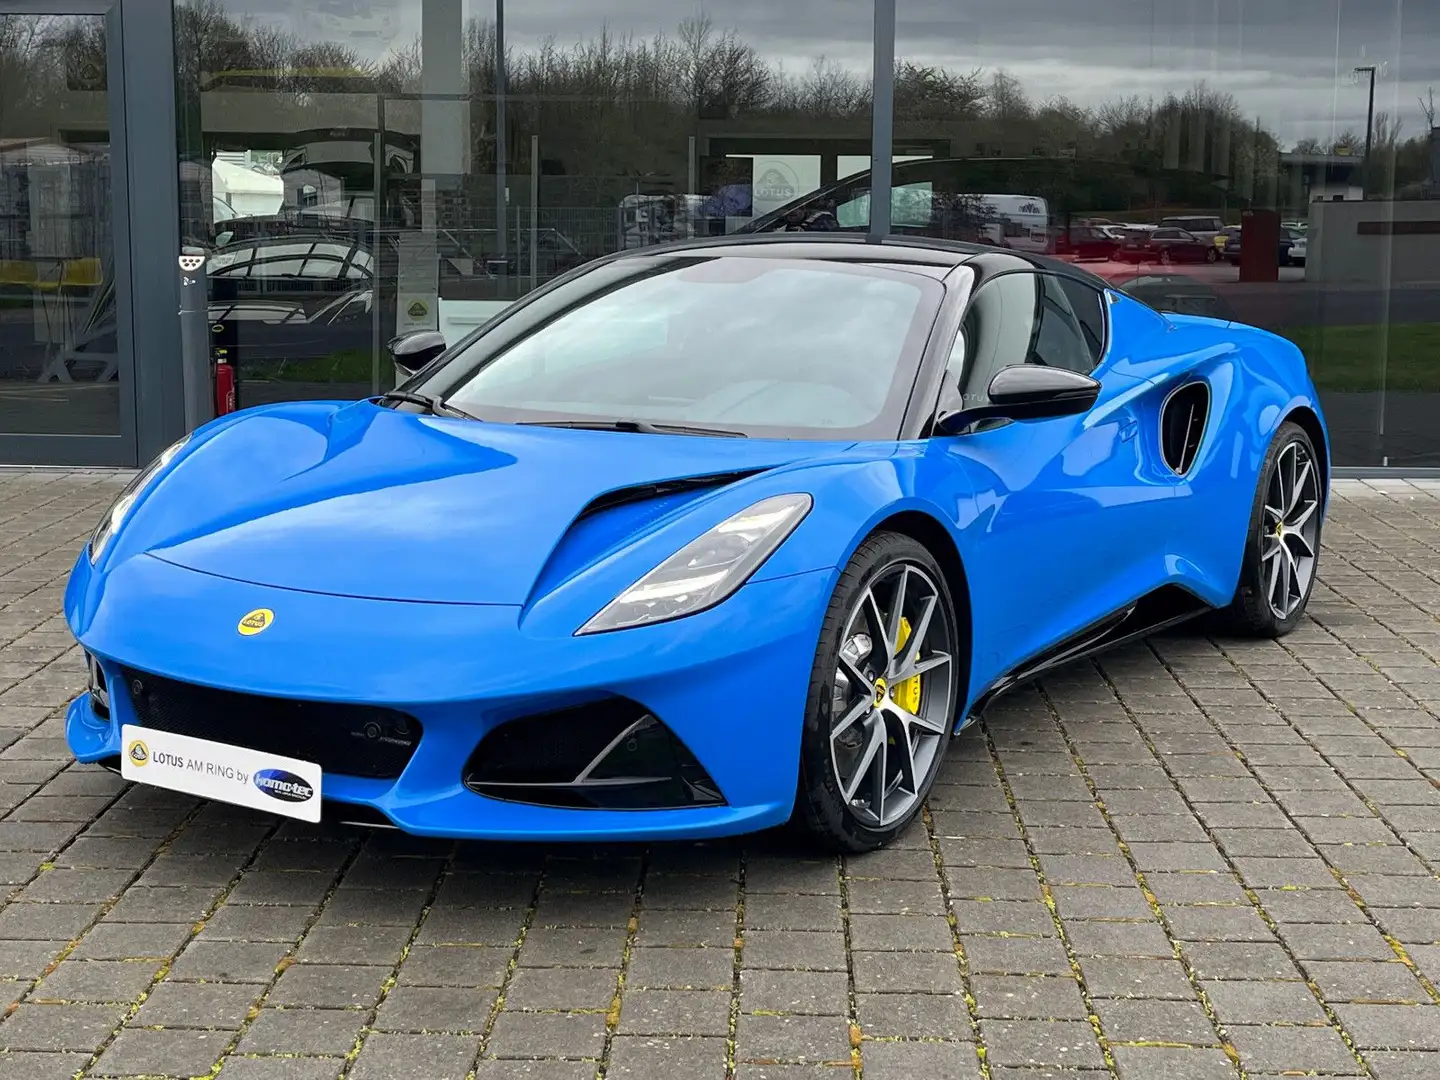 Lotus Emira I4 DCT "First Edition" by Lotus am Ring plava - 1